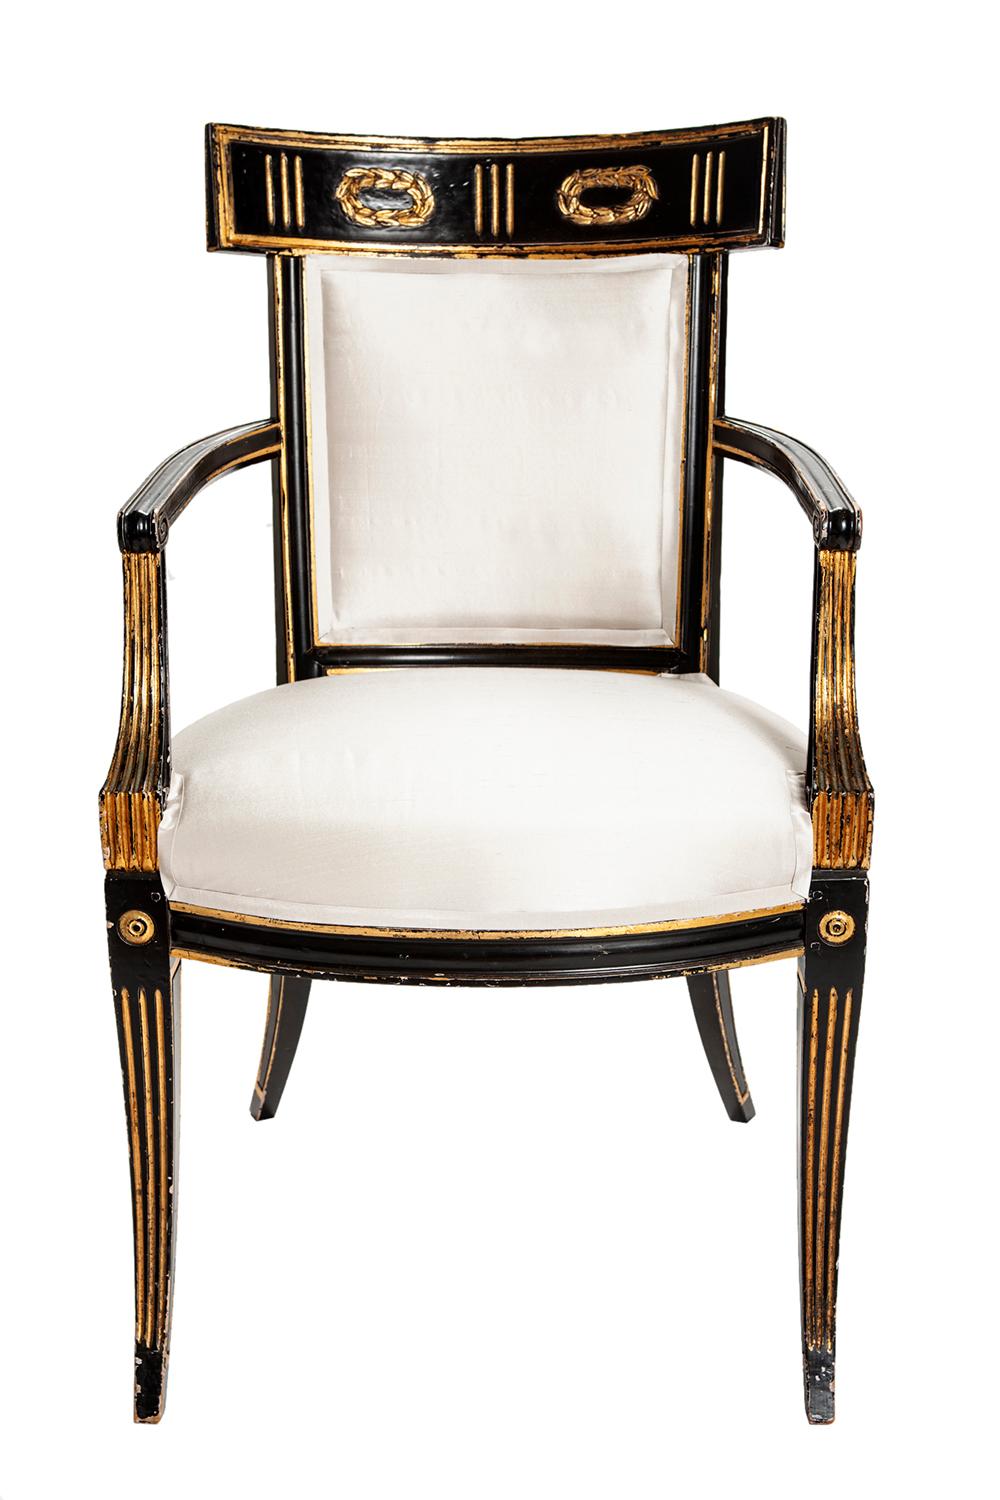 Early 19th Century Hand Painted & Gilt Italian Regency Armchairs in Silk; a Pair For Sale 3